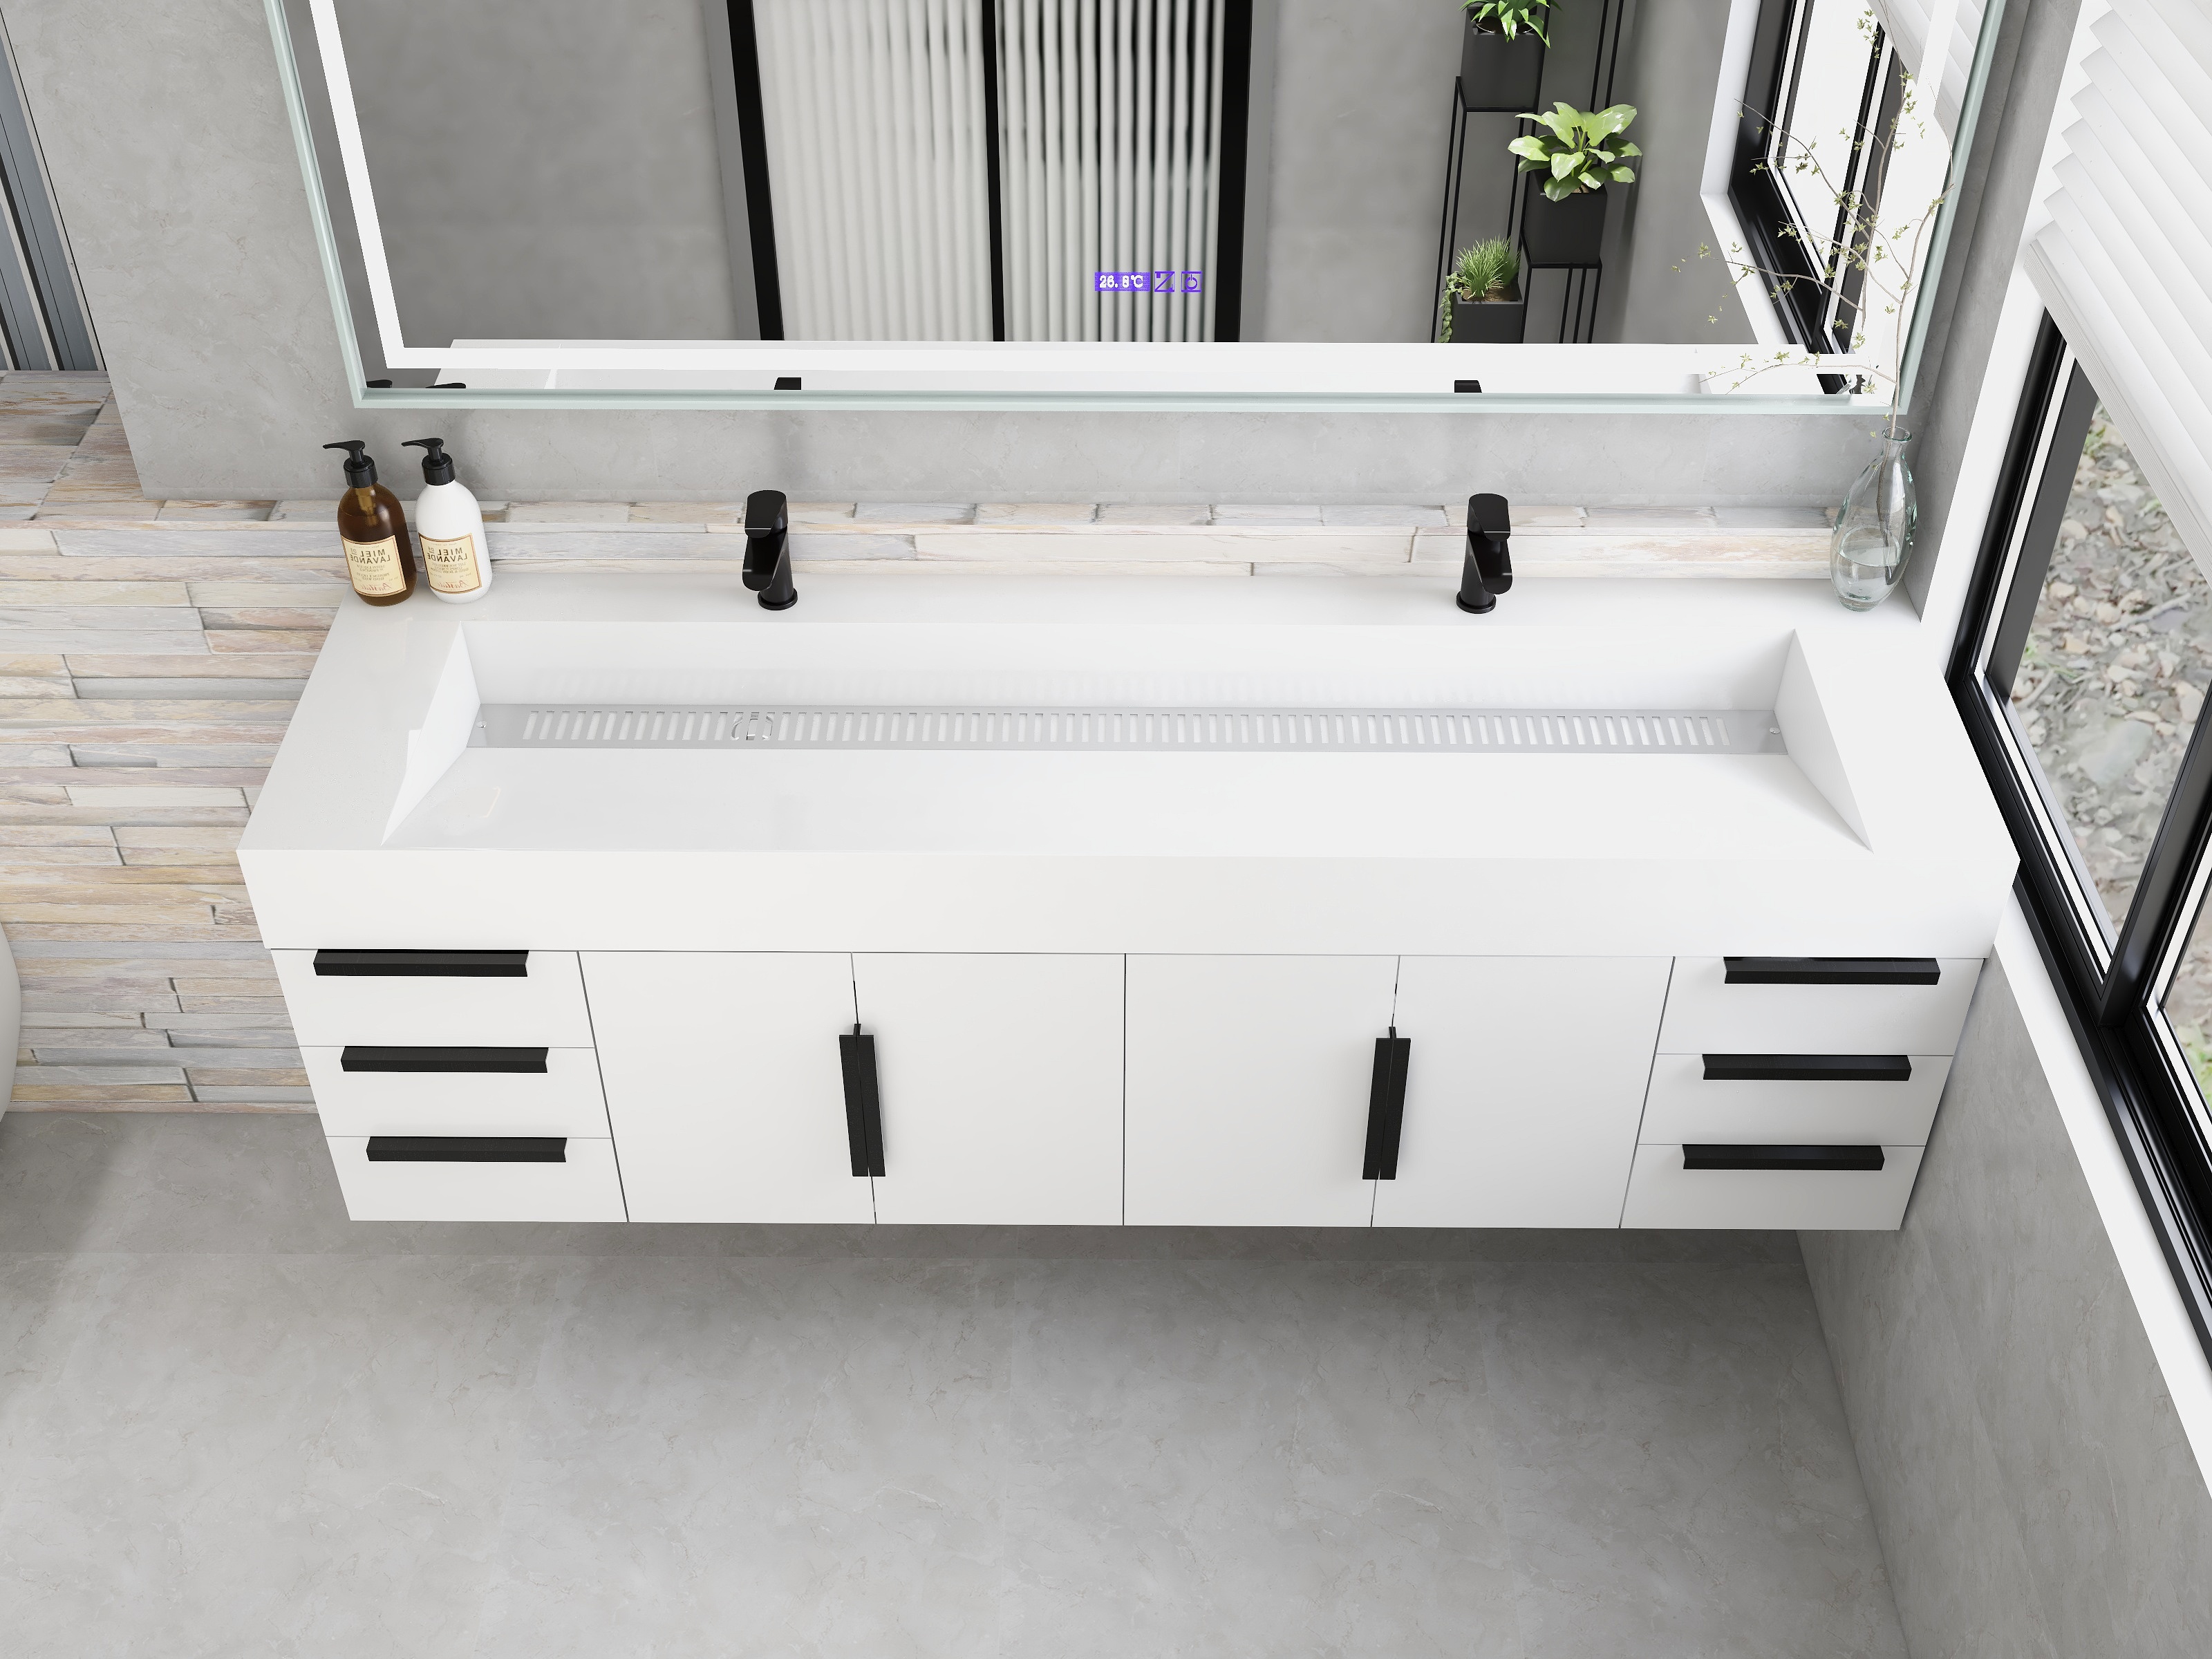 Bethany 72" Wall-Mounted Floating Bathroom Vanity with Reinforced Acrylic Double Sink in Gloss White with Black Handles | Better Vanity Bath Vanities